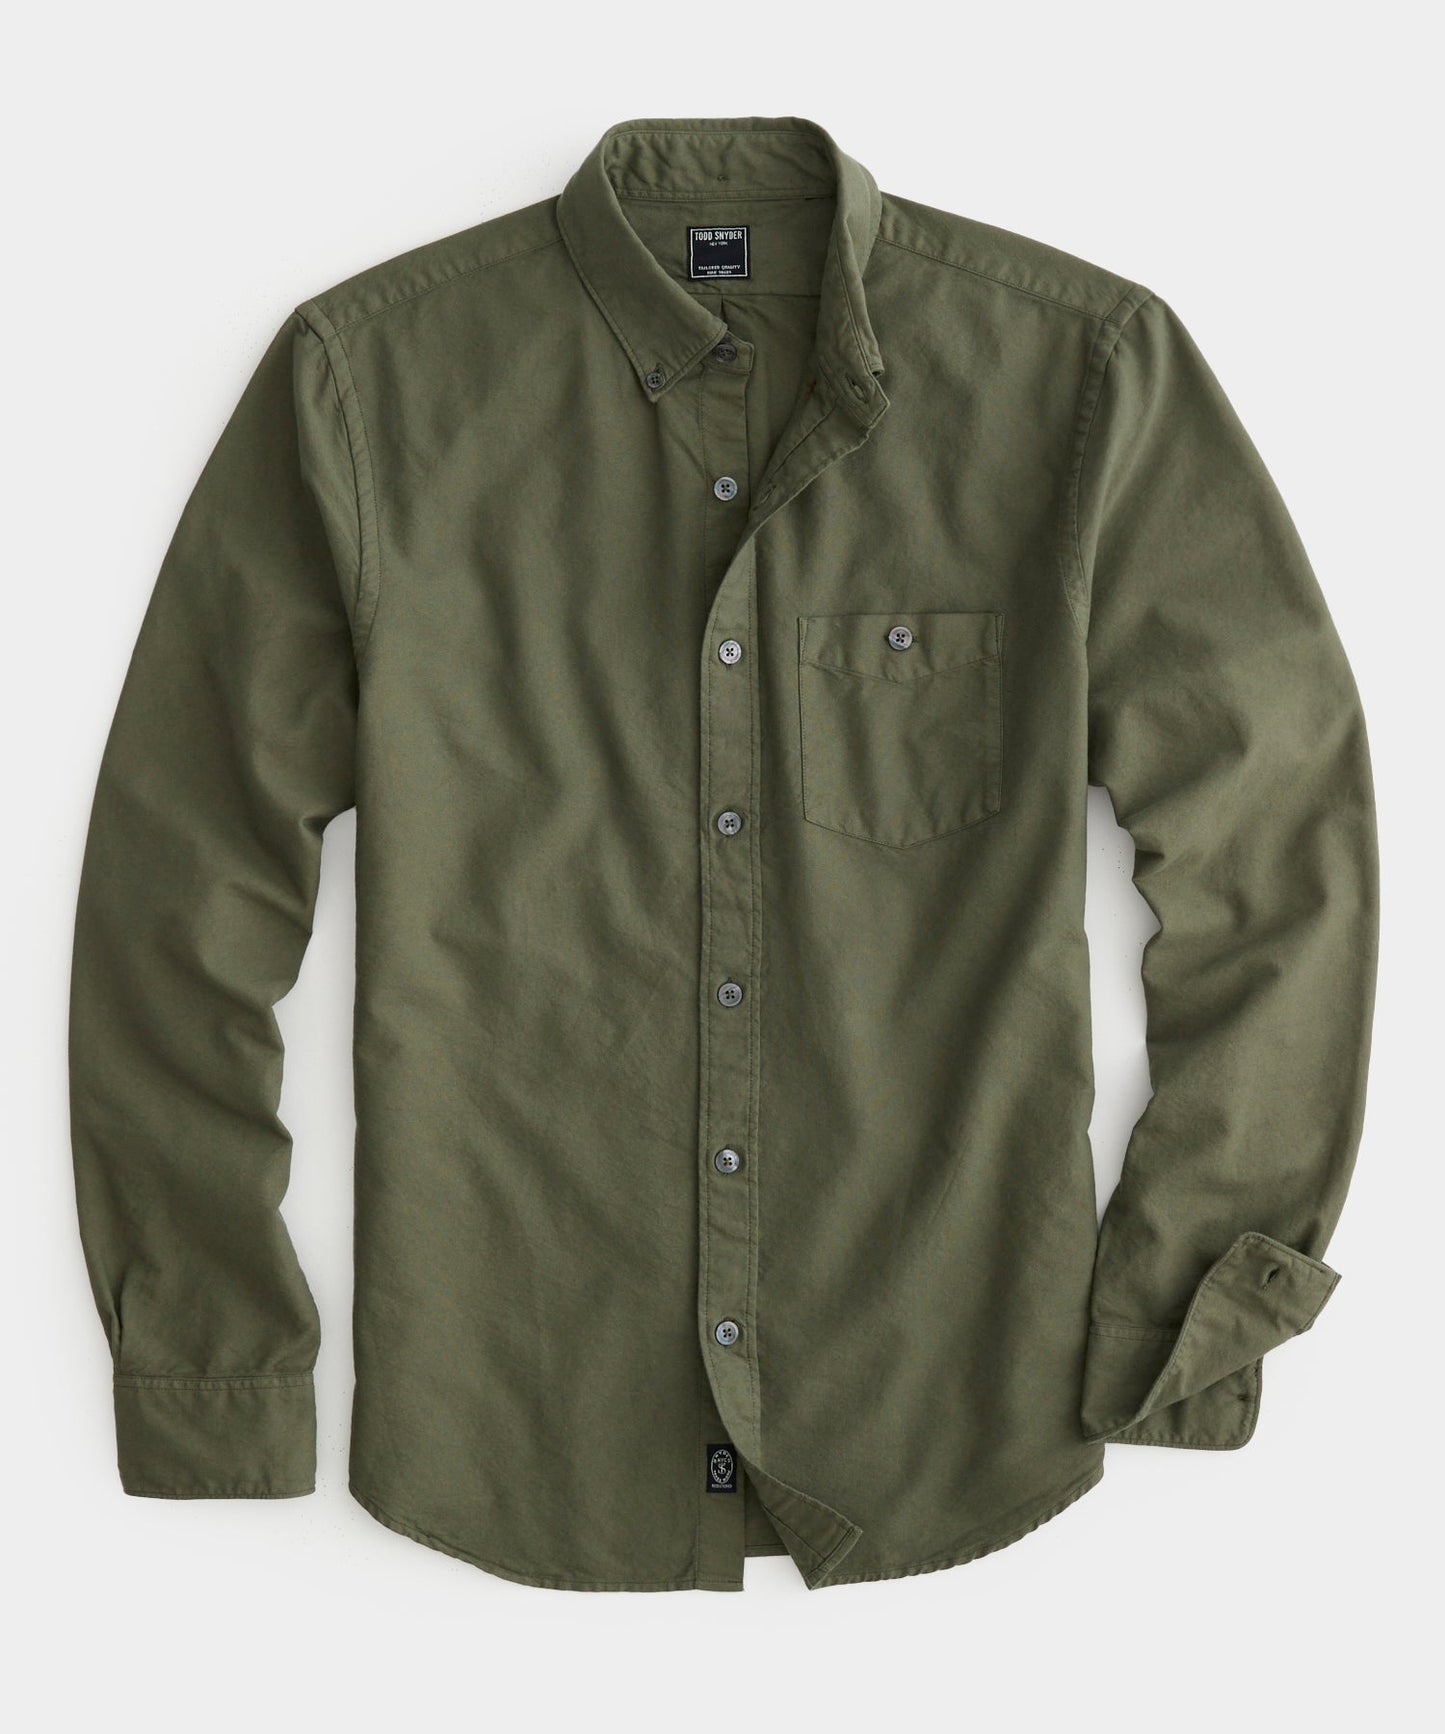 Todd Snyder - TODD SNYDER CLASSIC FIT GARMENT-DYED FAVORITE OXFORD IN TENT GREEN - Rent With Thred